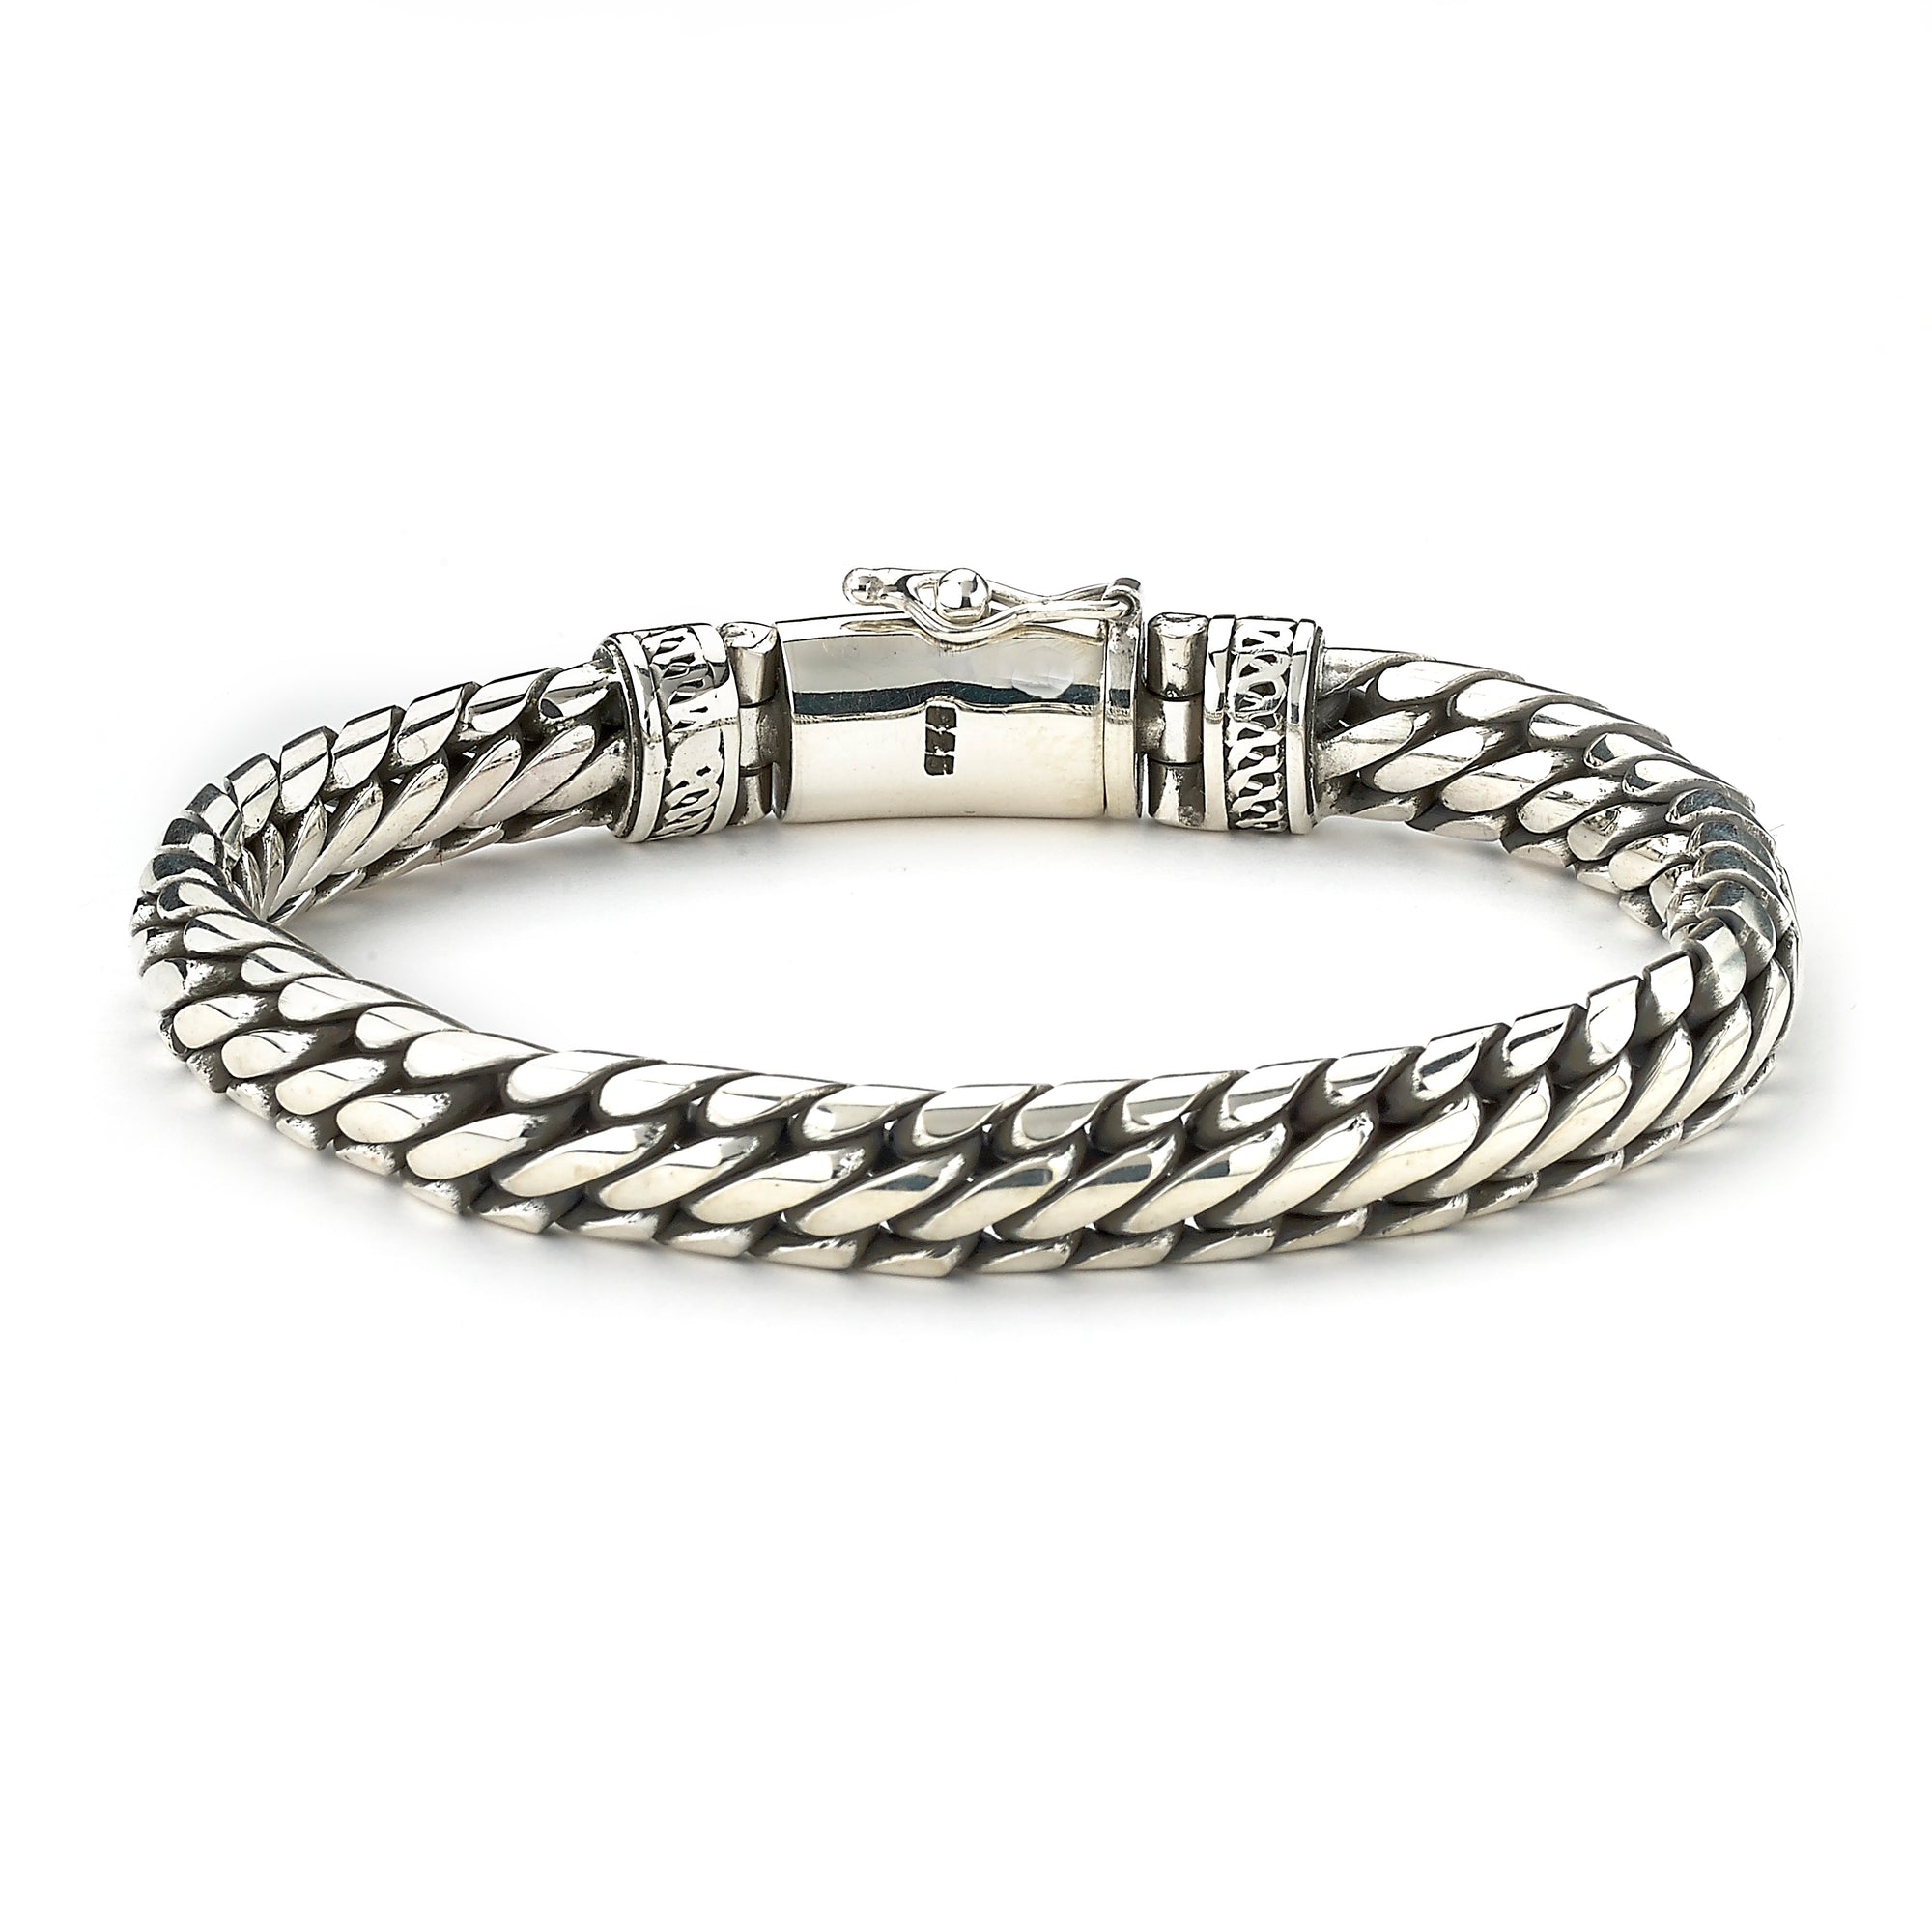 Terzetto Bracelet available at Talisman Collection Fine Jewelers in El Dorado Hills, CA and online. Specs: Terzetto Bracelet crafted in Sterling Silver features a woven chain design. 8". 